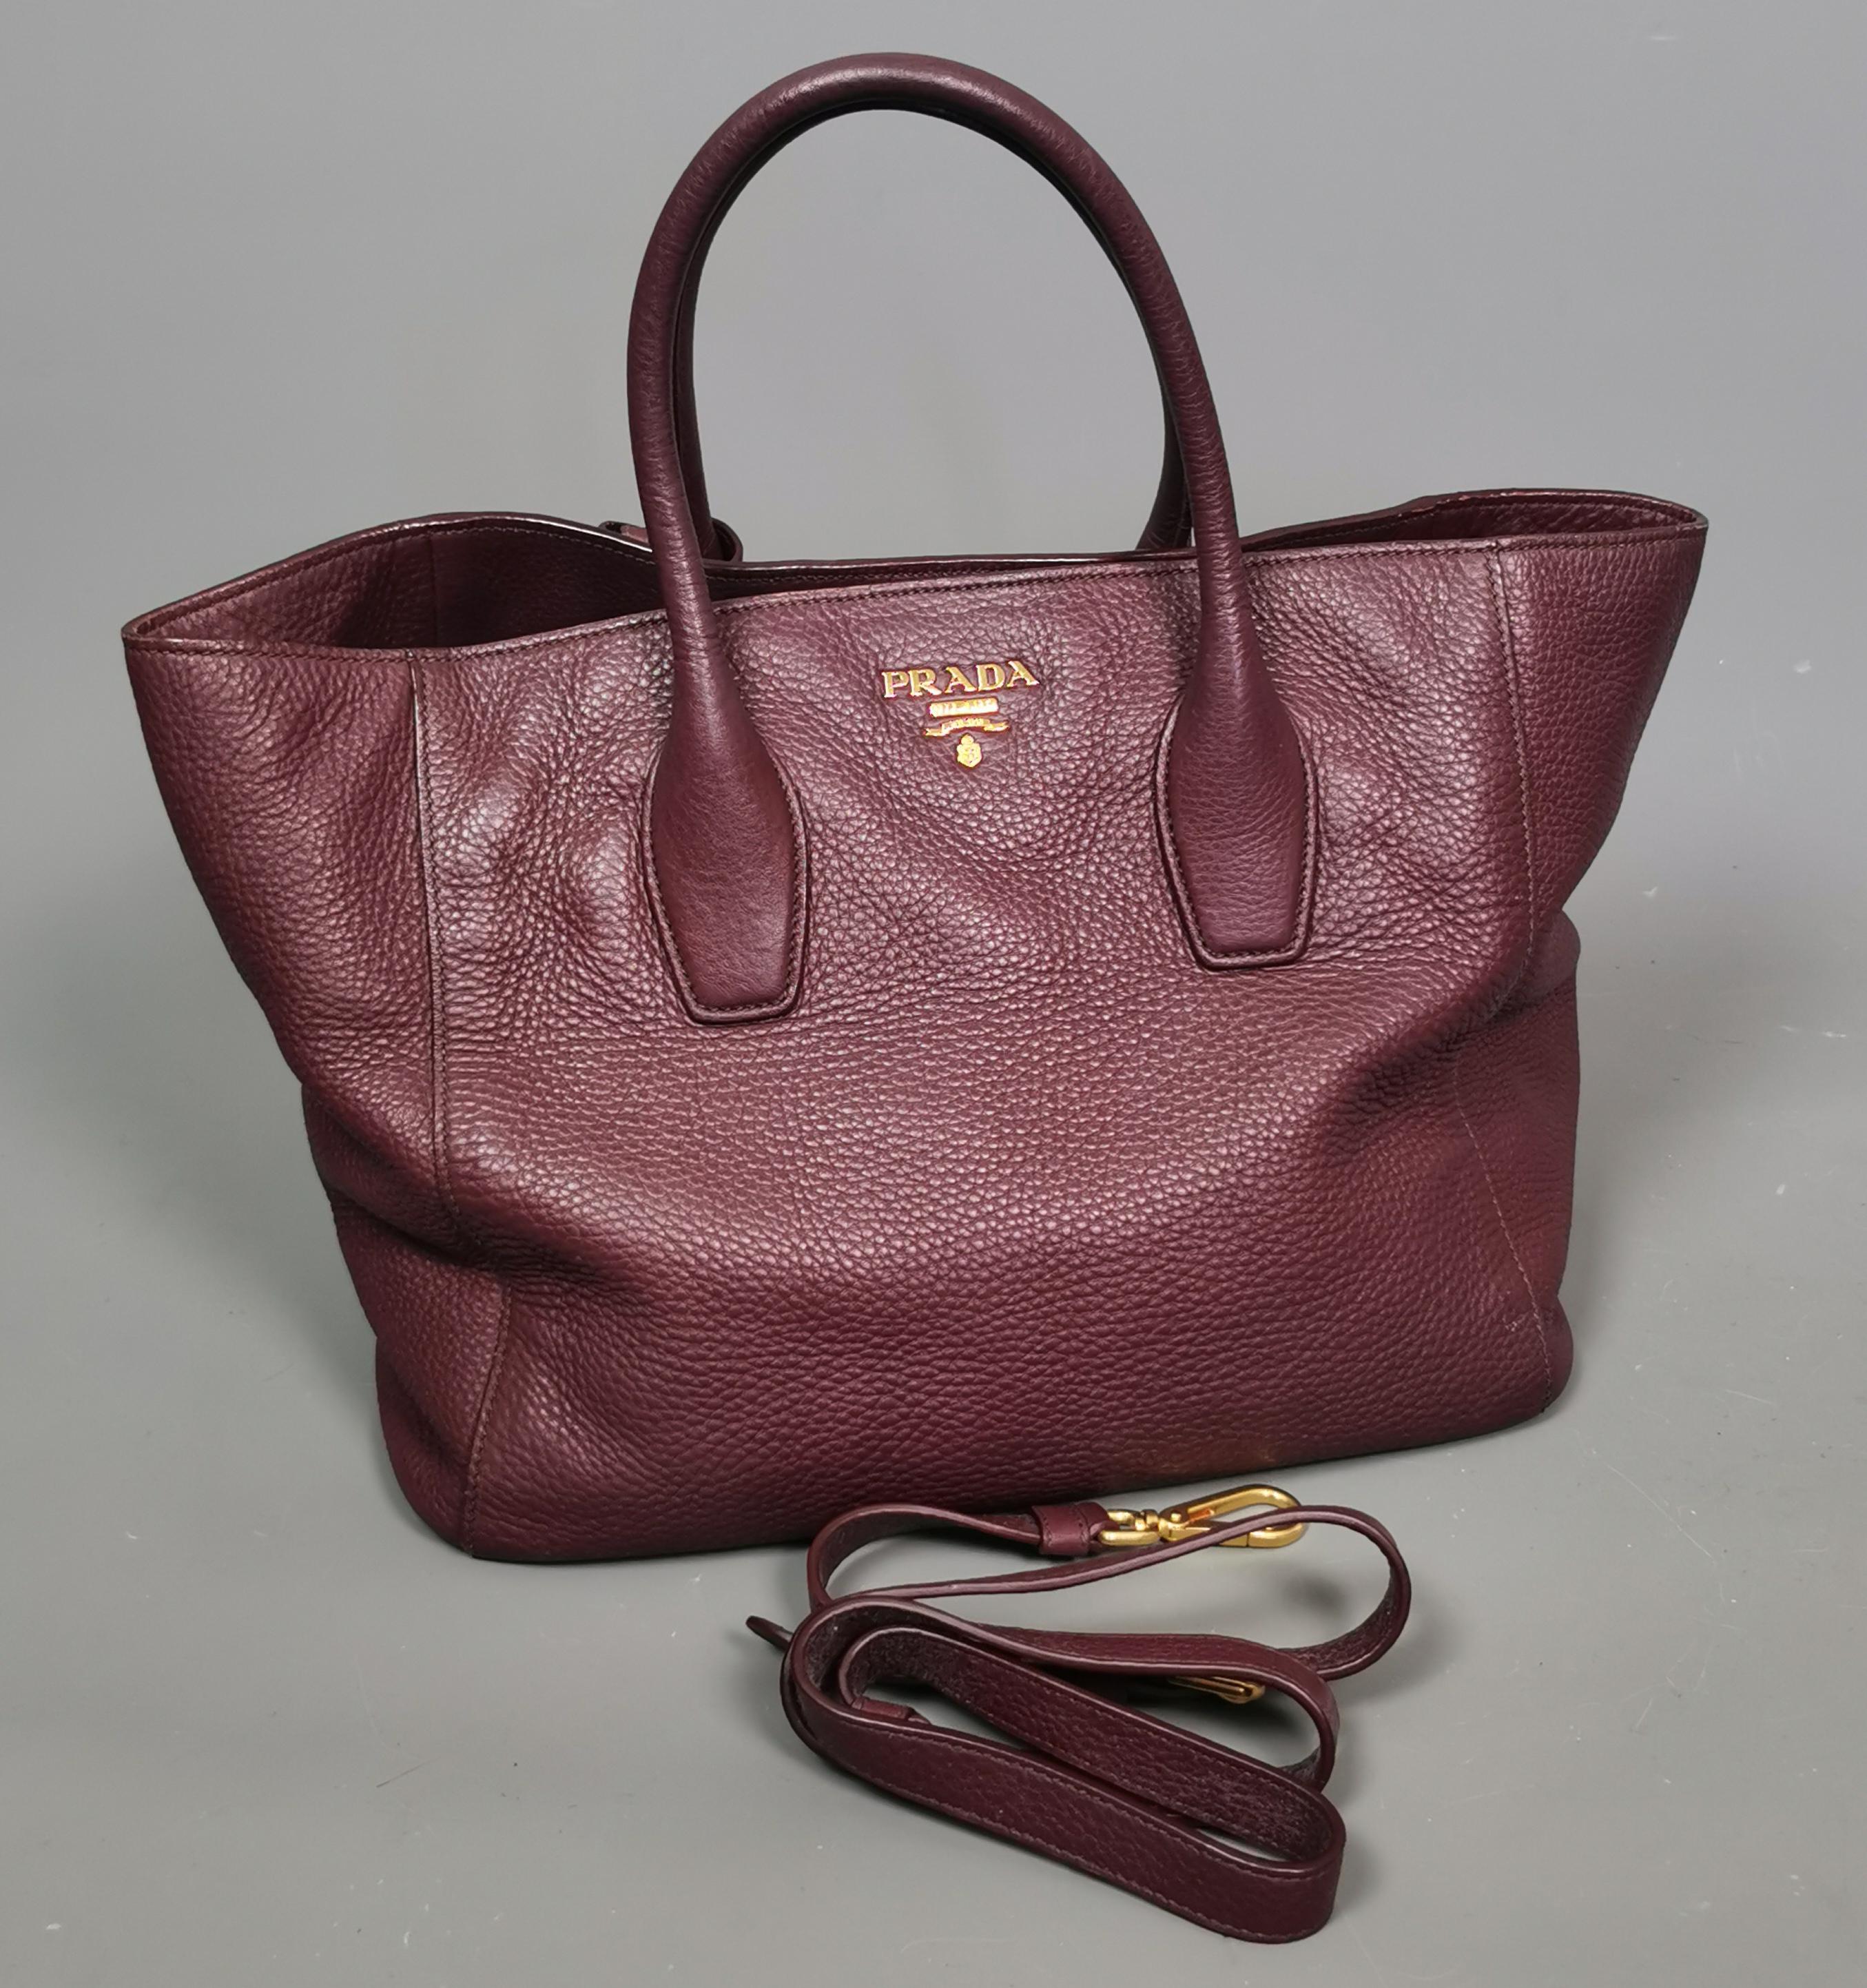 A simply gorgeous Prada Vitello Daino burgandy leather shopper or tote bag. 

A great sized bag with plenty of room to add your days essentials, the bag is convertible as it can also be worn as a shoulder bag and comes with the original shoulder